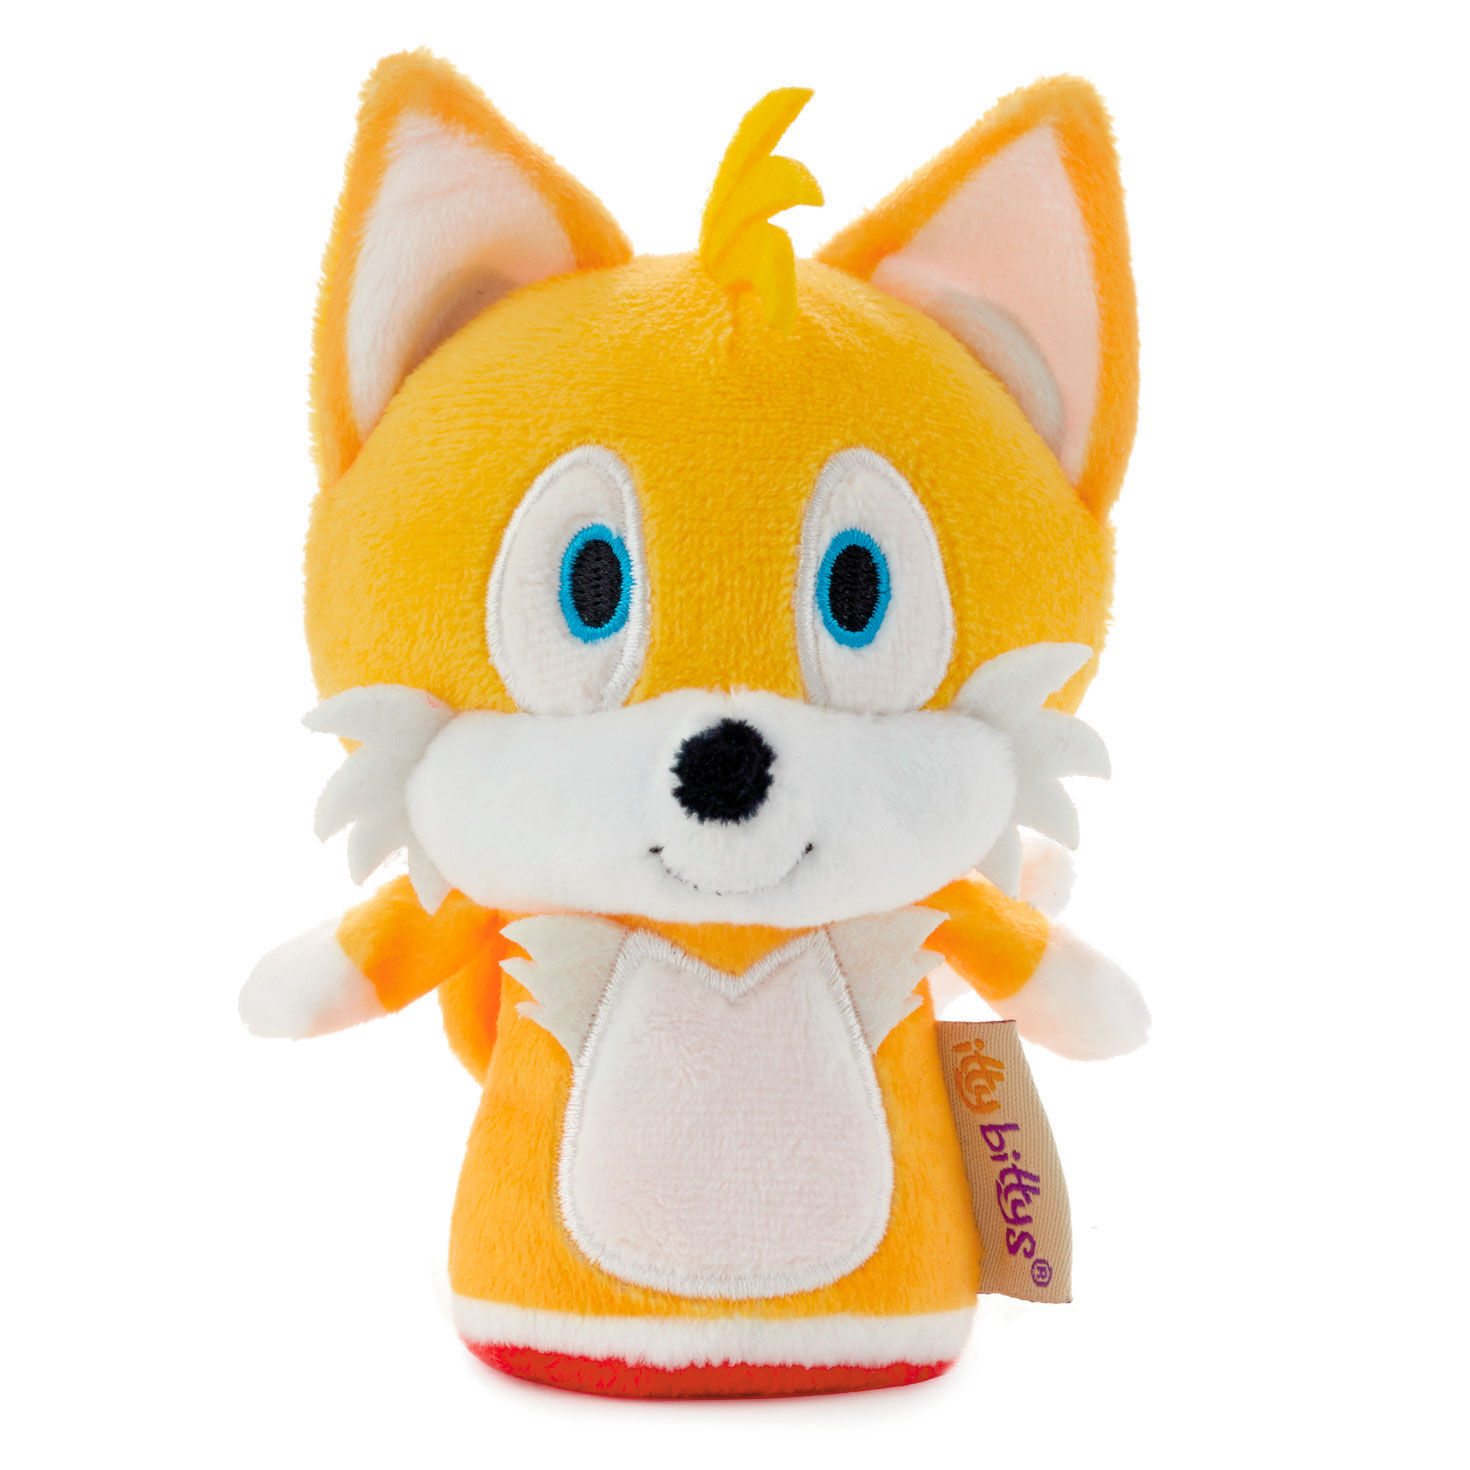 Crayola Art School Tails with Heart - Tails with Heart Figurine at